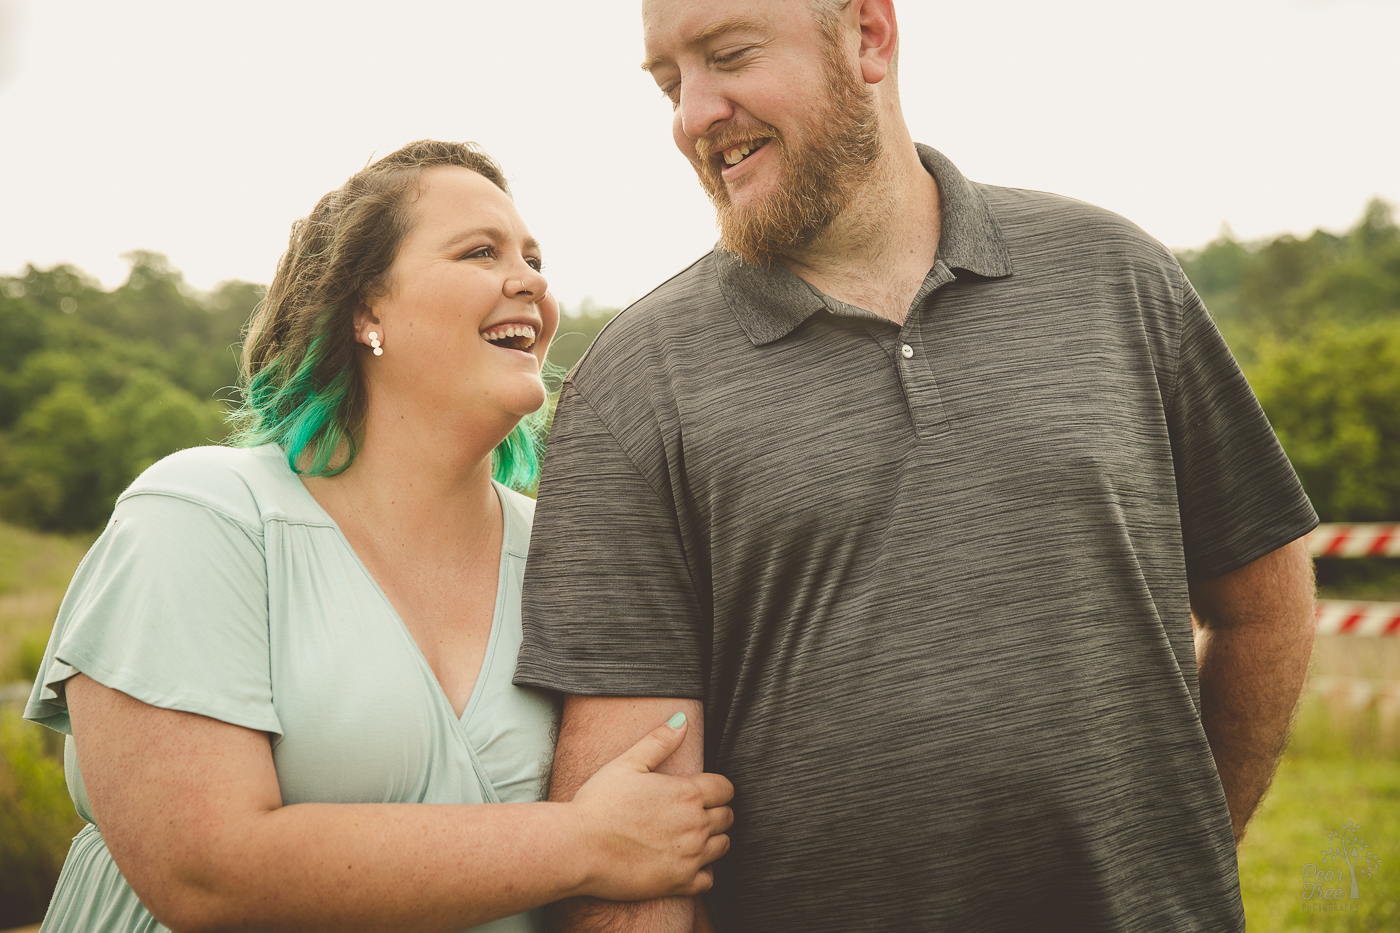 laughing couple holding each other close. The woman is wearing a green dess and nail polish with teal hair